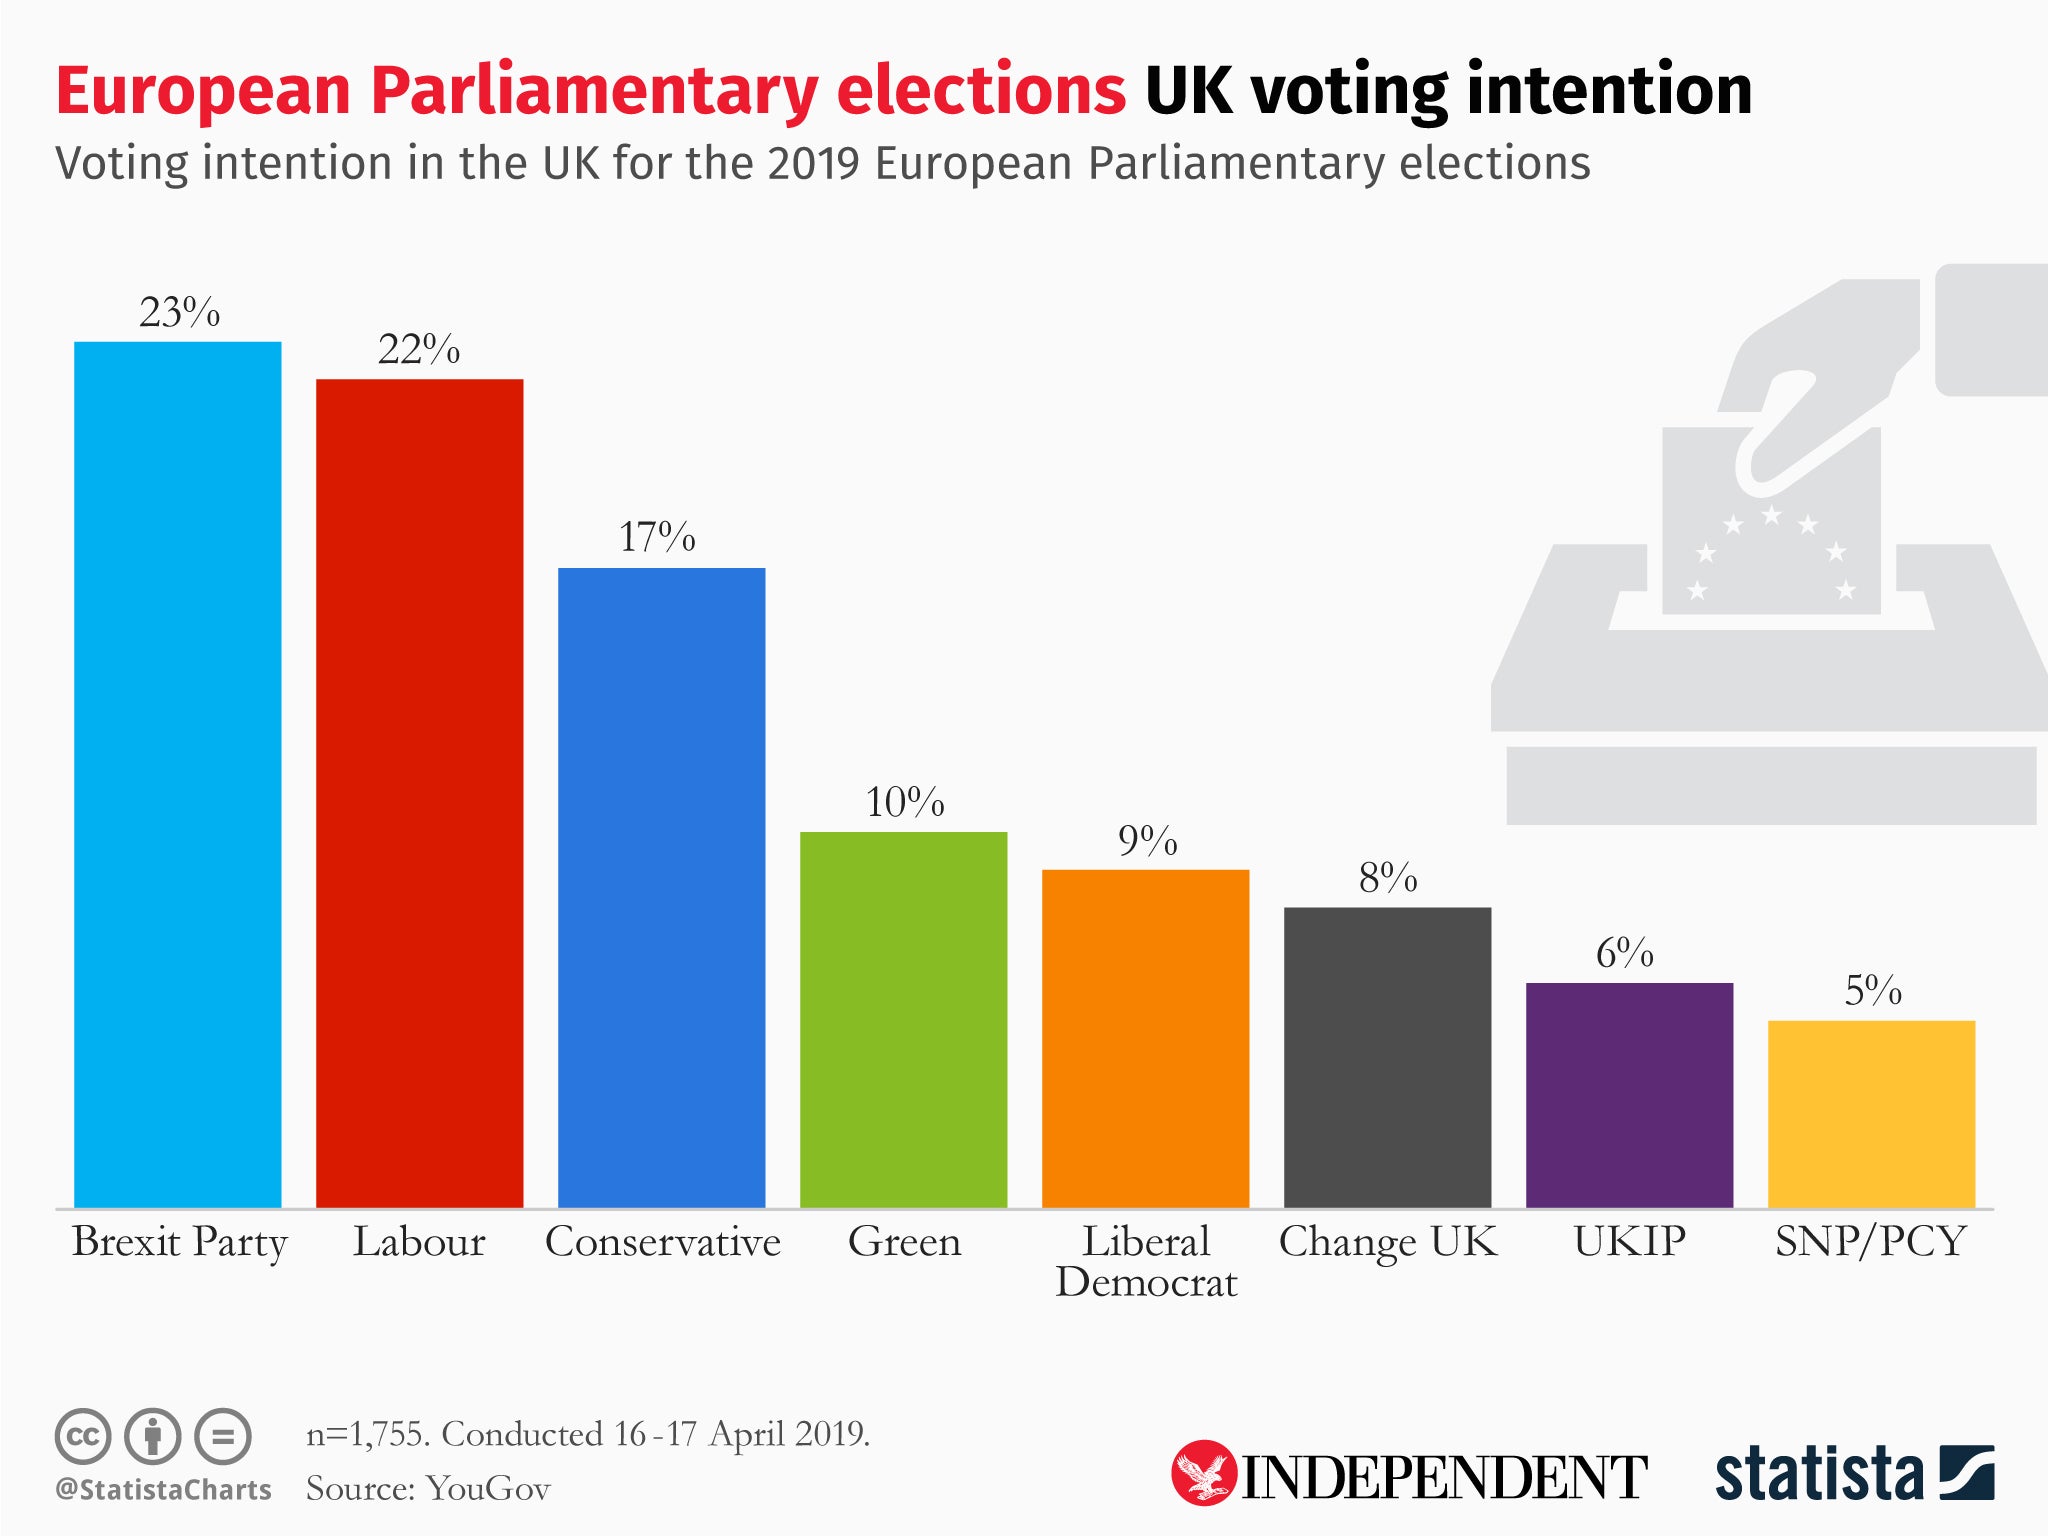 European Parliament voting intentions, from YouGov poll